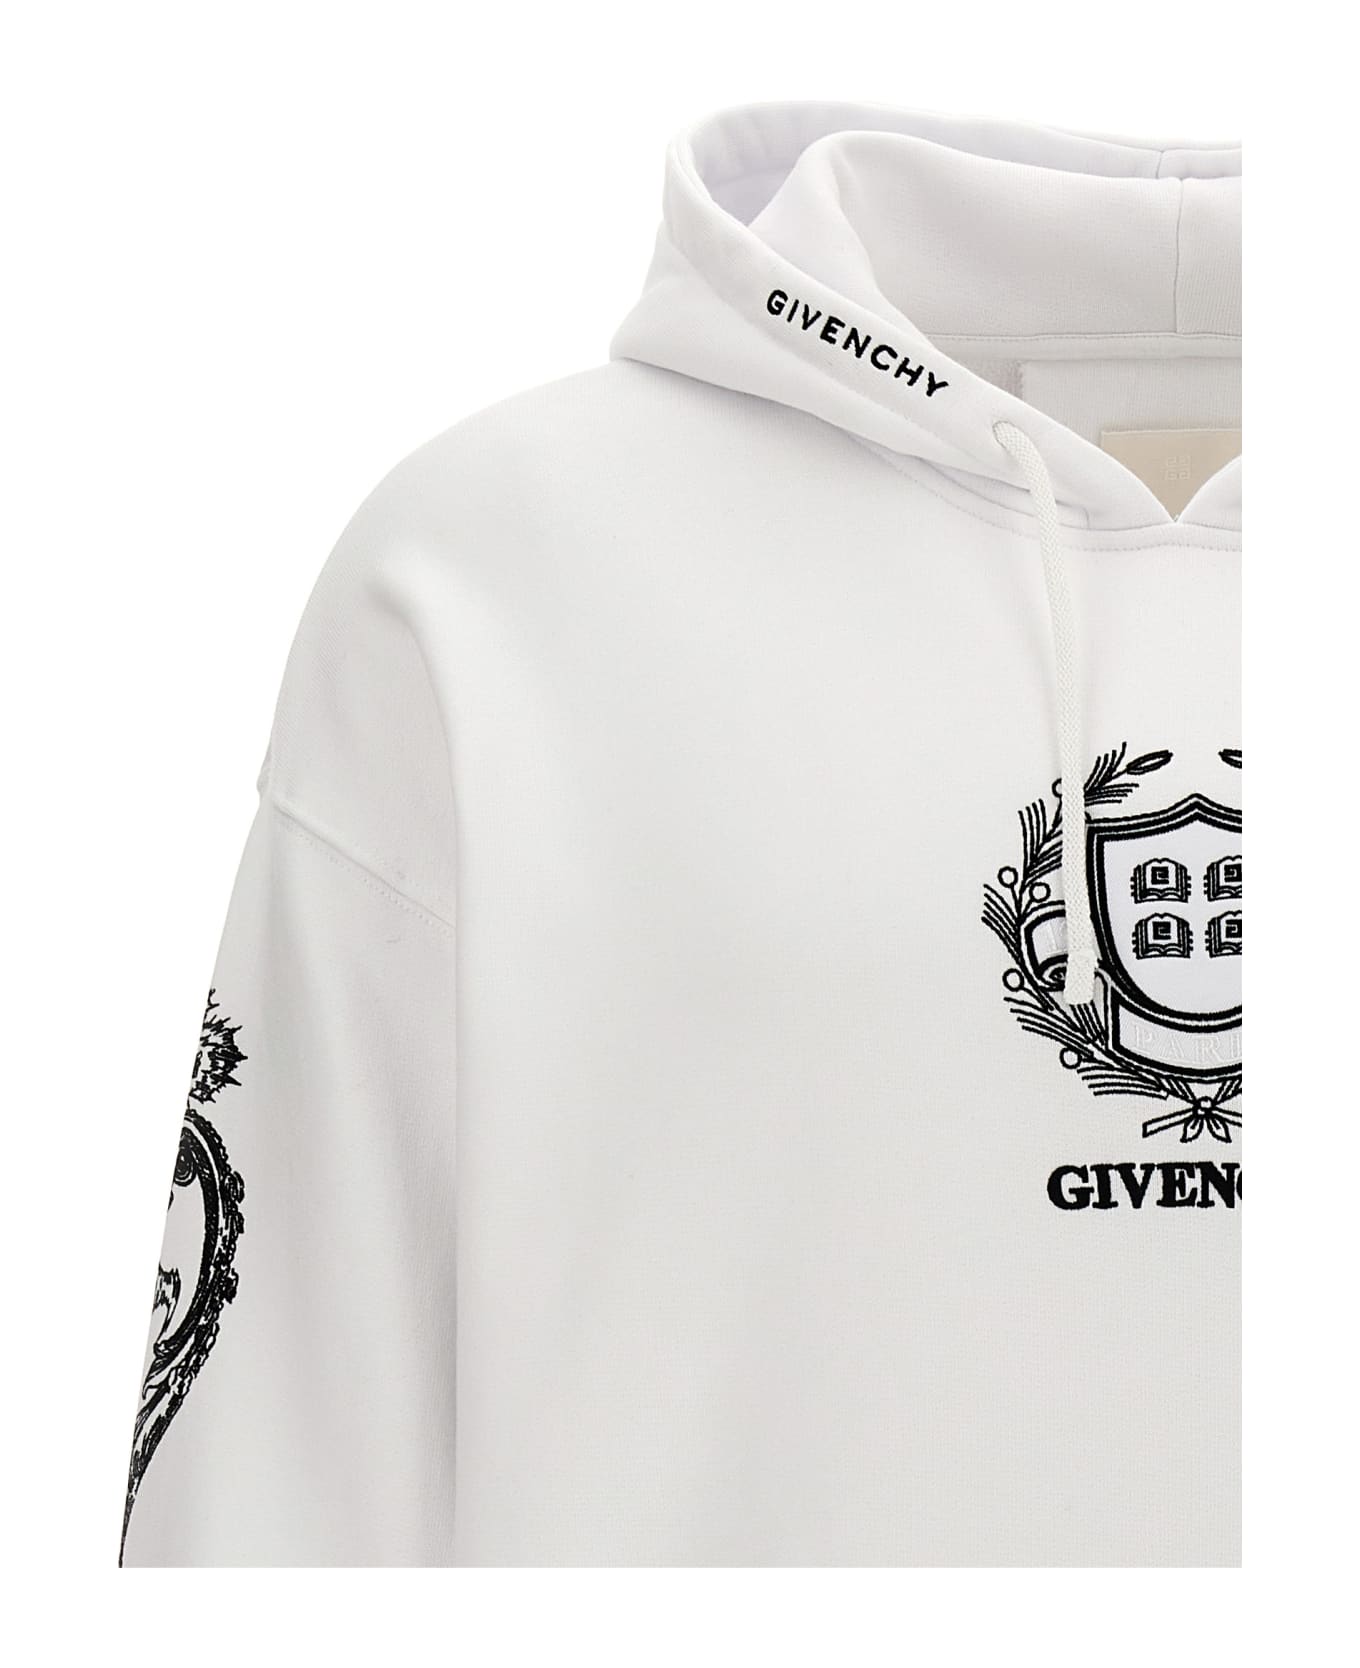 Givenchy Embroidery And Print Hoodie - White/Black